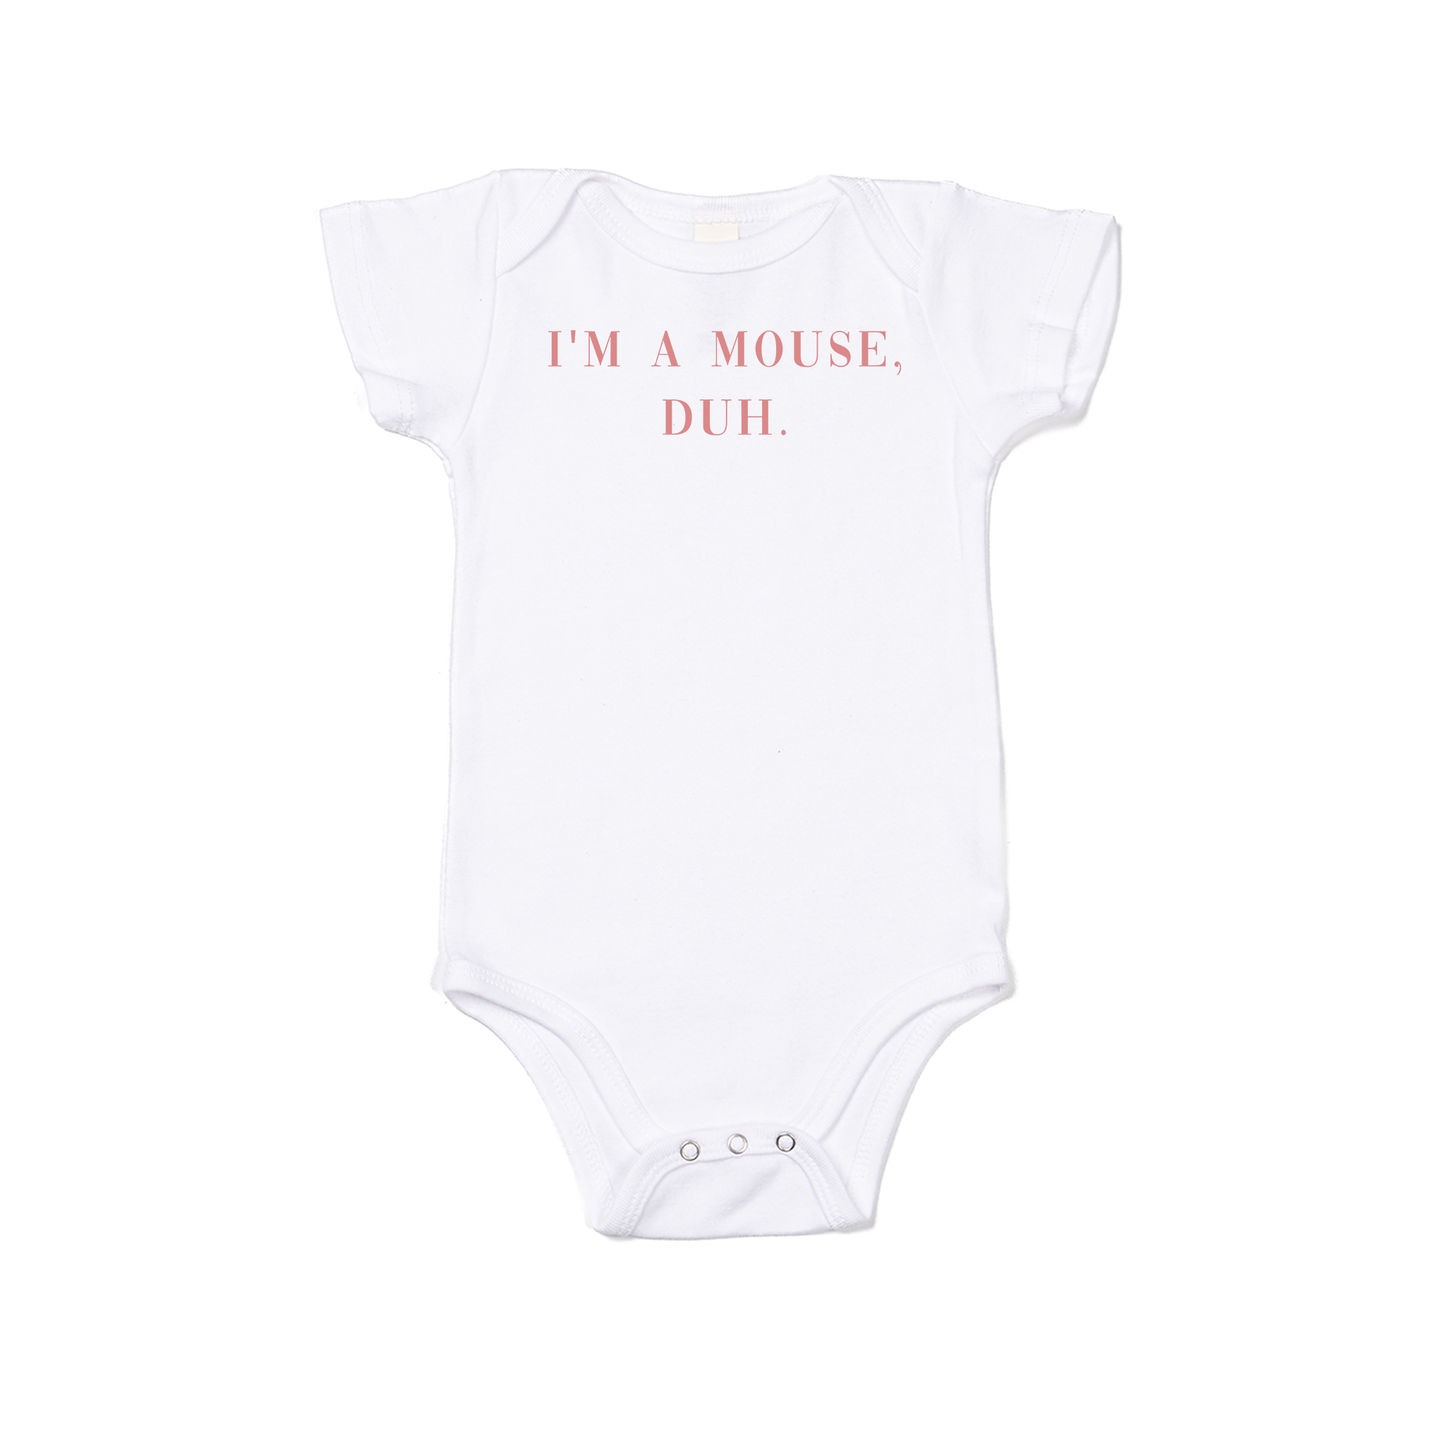 I'm a mouse, duh. (Pink) - Bodysuit (White, Short Sleeve)